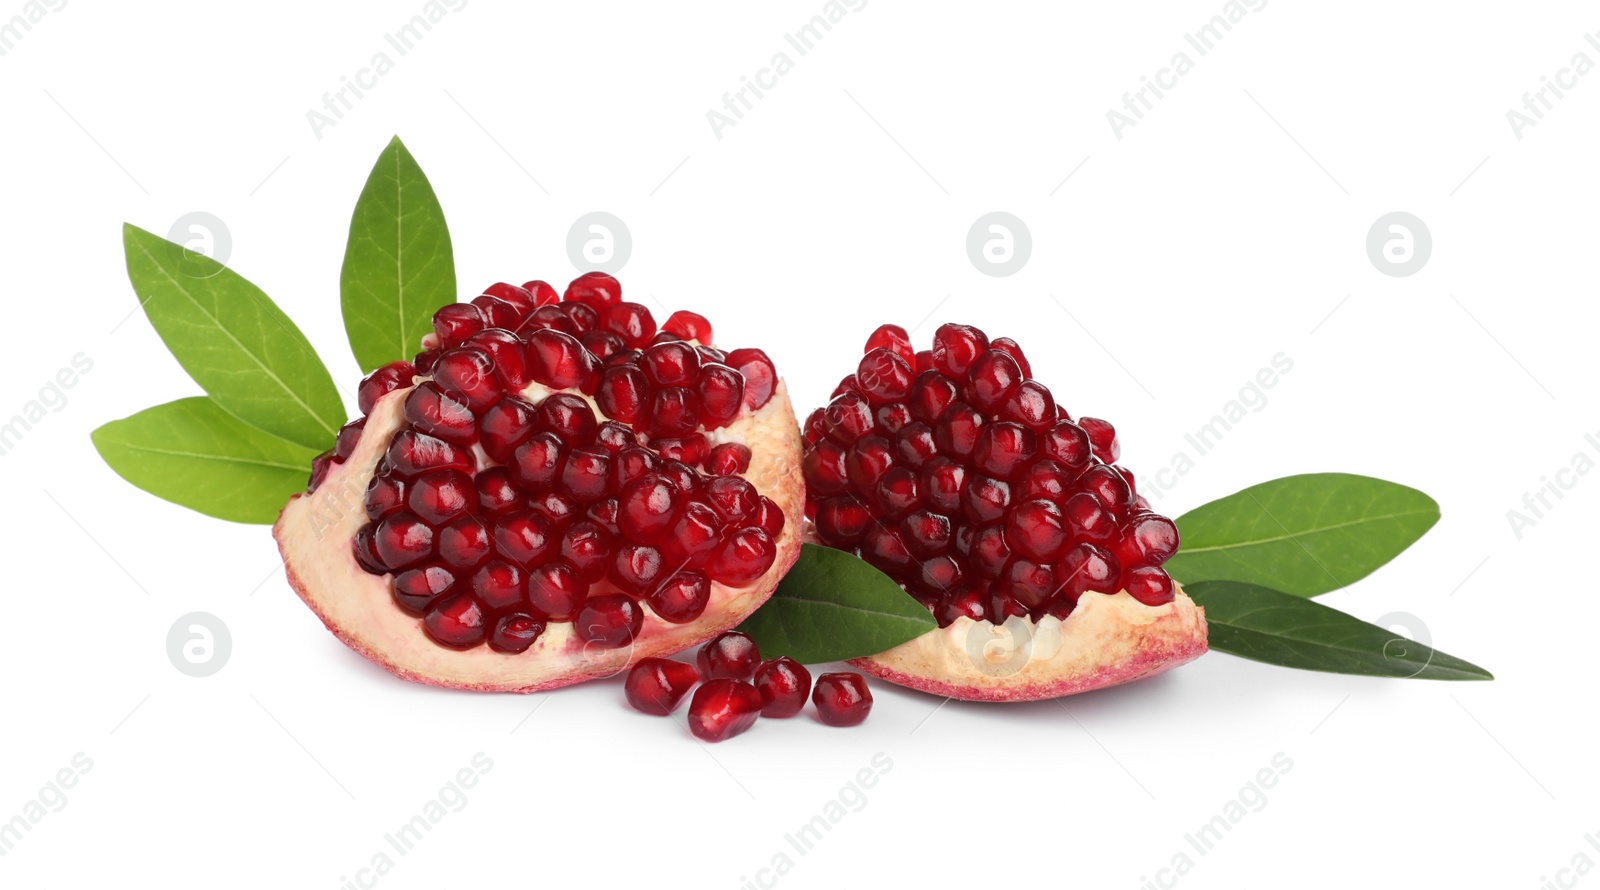 Photo of Pieces of ripe pomegranate with green leaves on white background